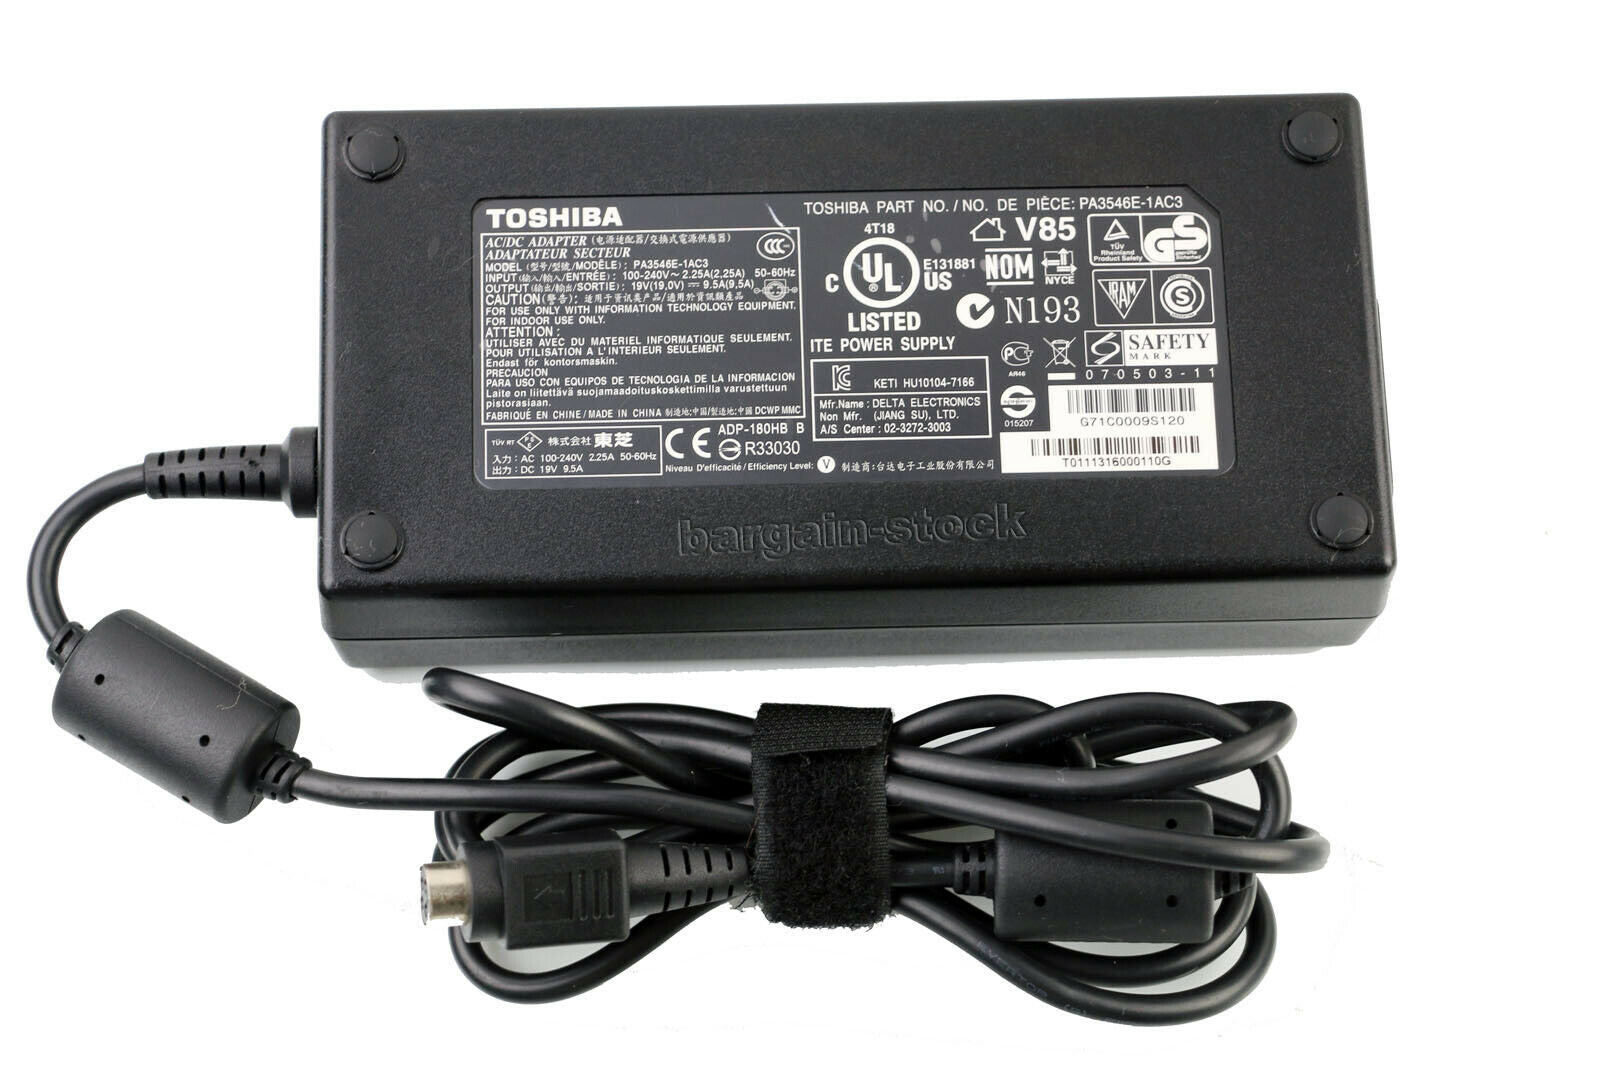 NEW Charger AC Adapter Charger For Toshiba Qosmio AVPC X75-A7170 19V 9.5A 180W PA3546E-1AC3